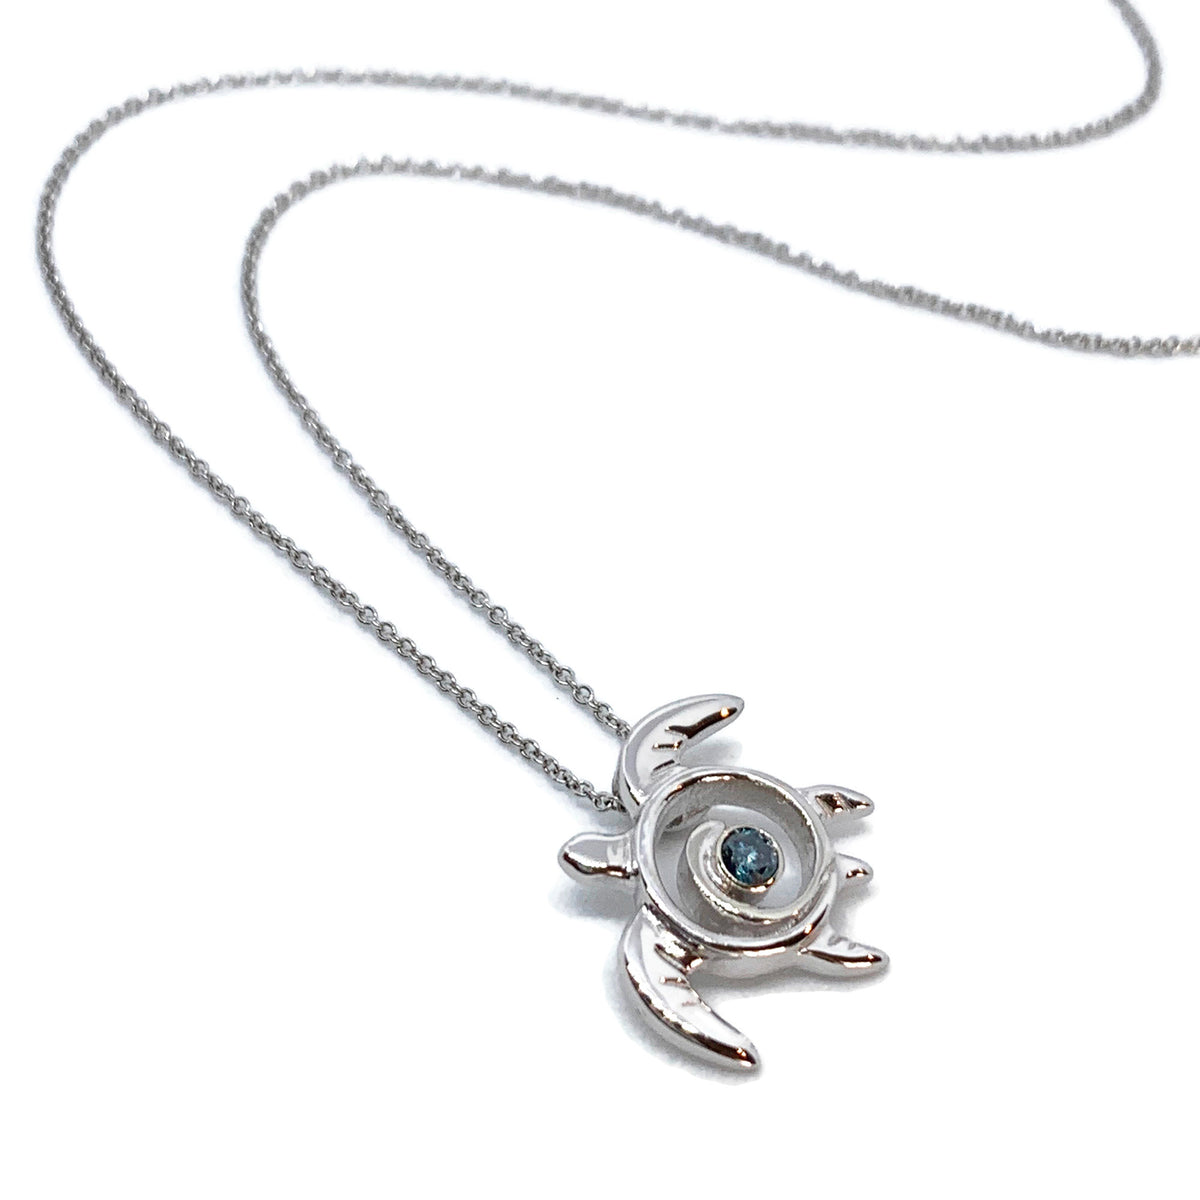 Sea Turtle Necklace White Gold with Blue Diamond